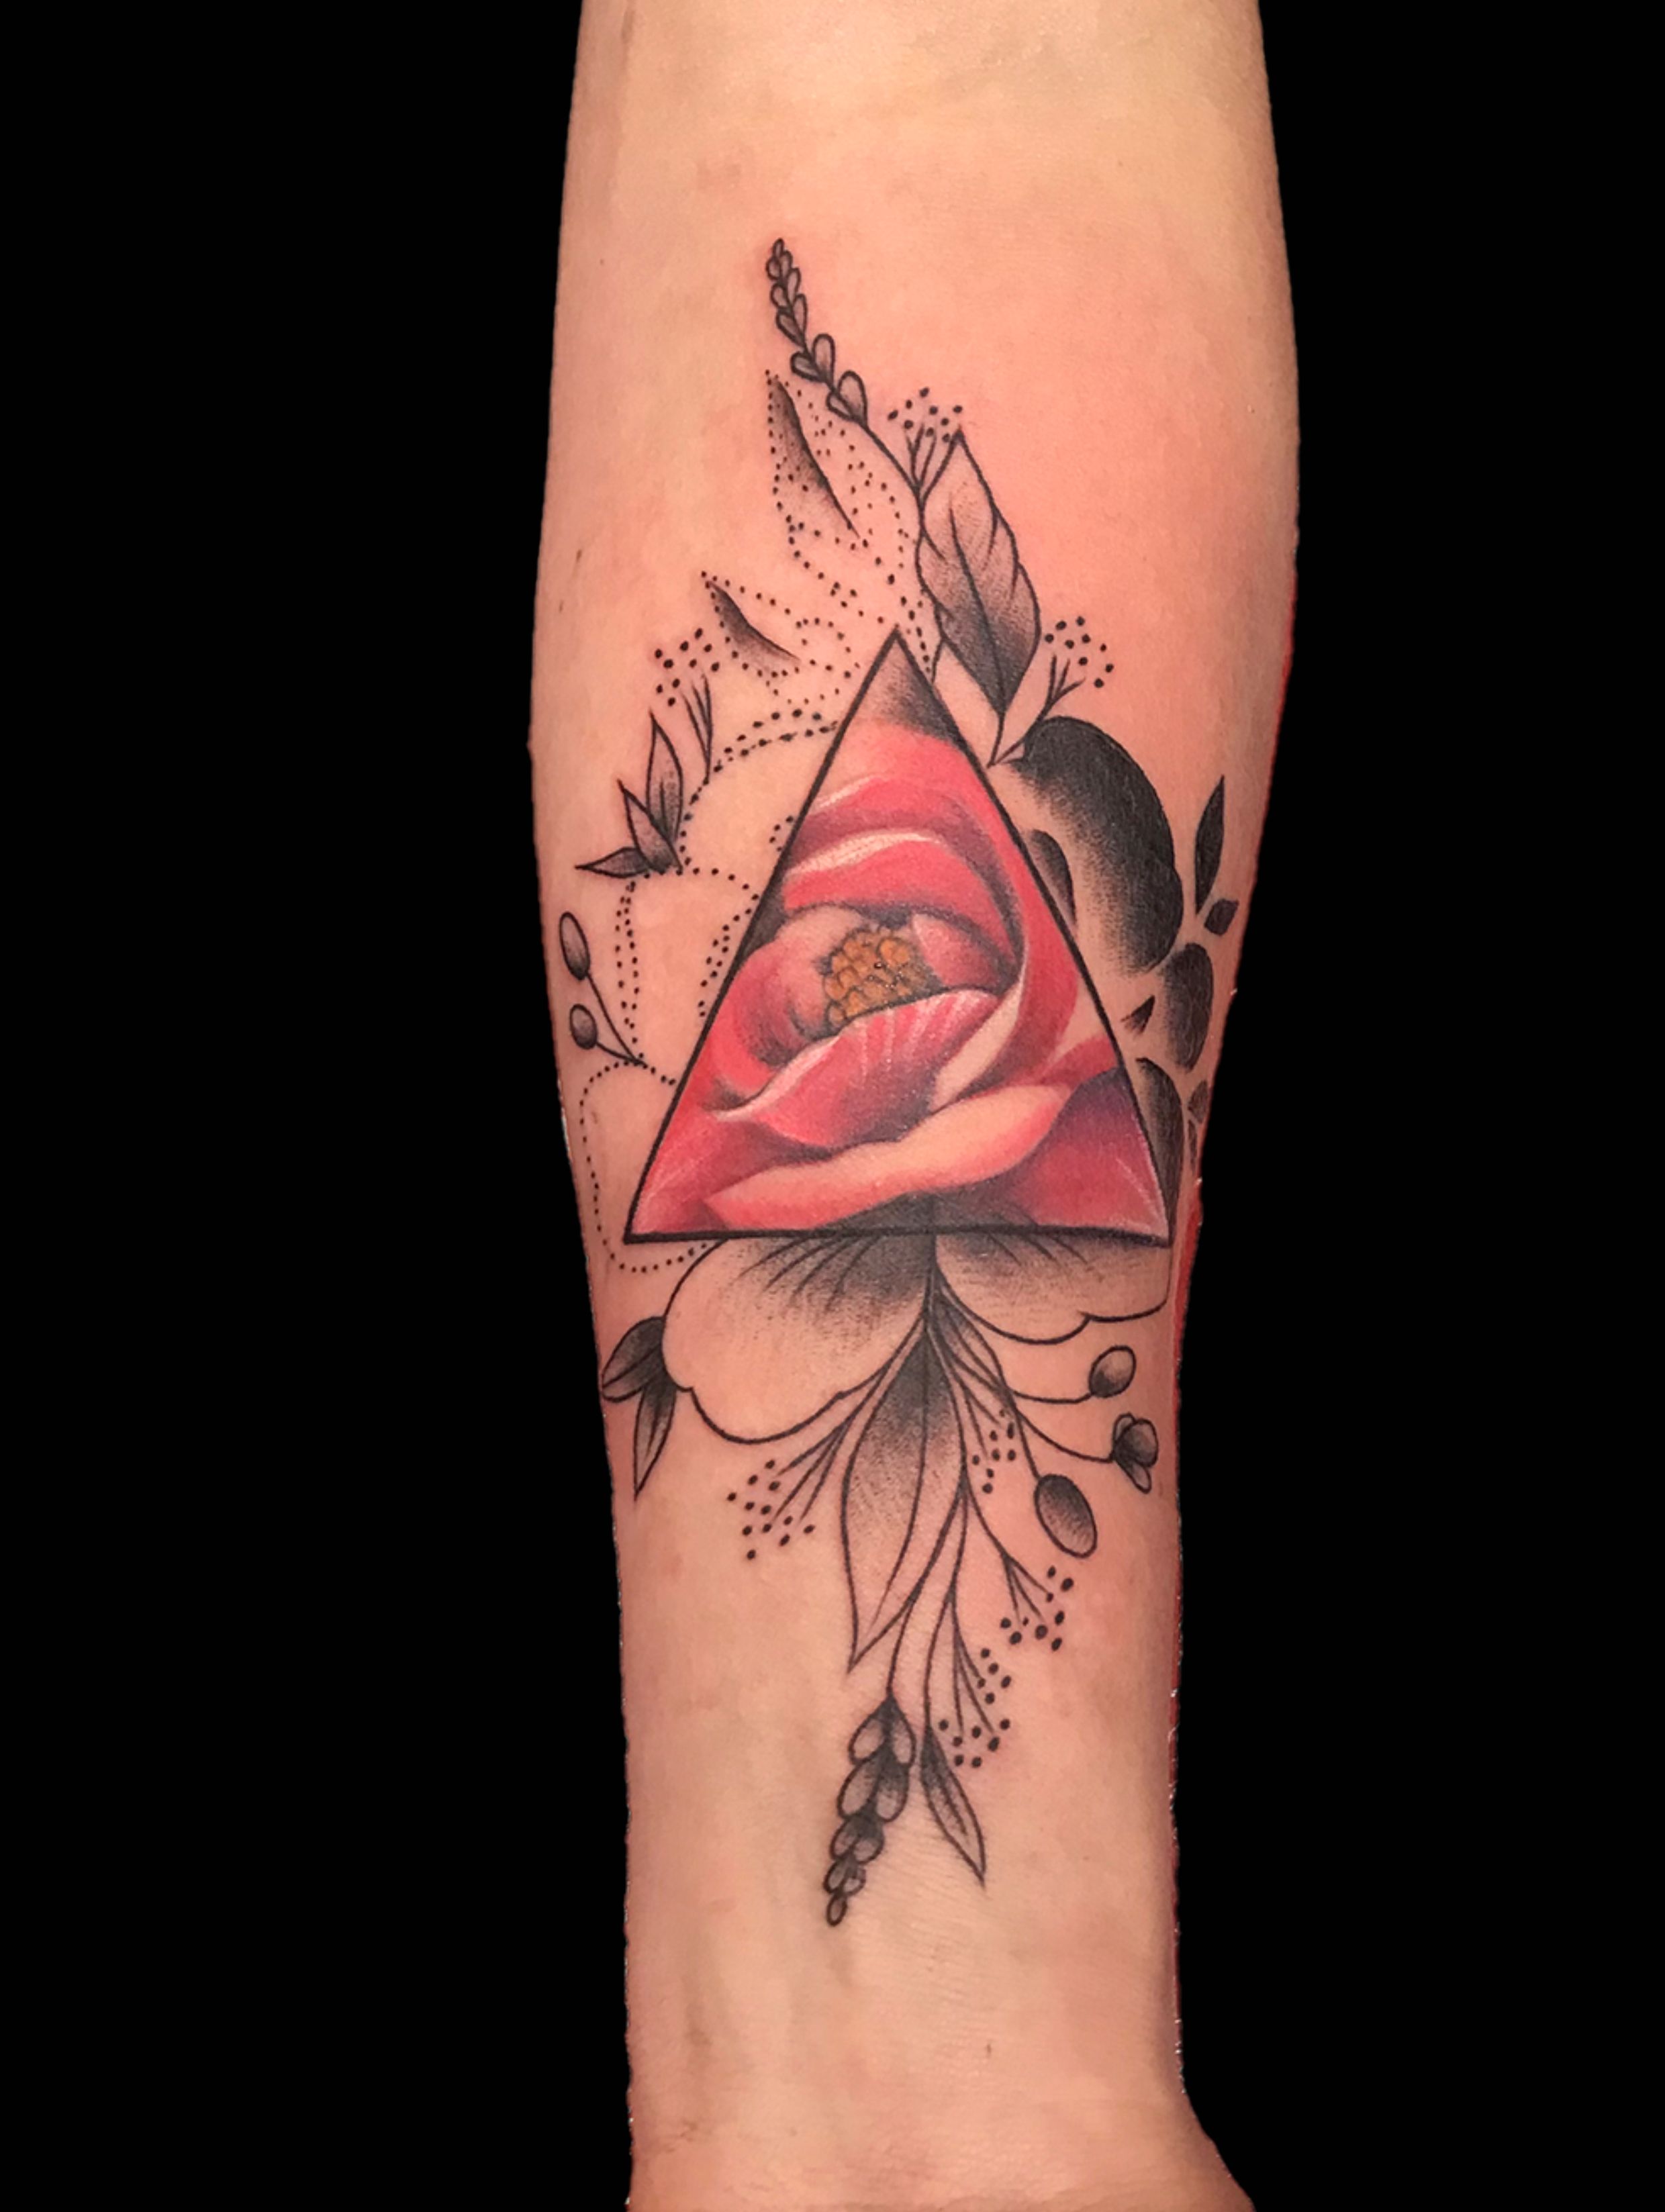 Where to Find the Best Melbourne Tattoo Artists? - Inkache Tattoo